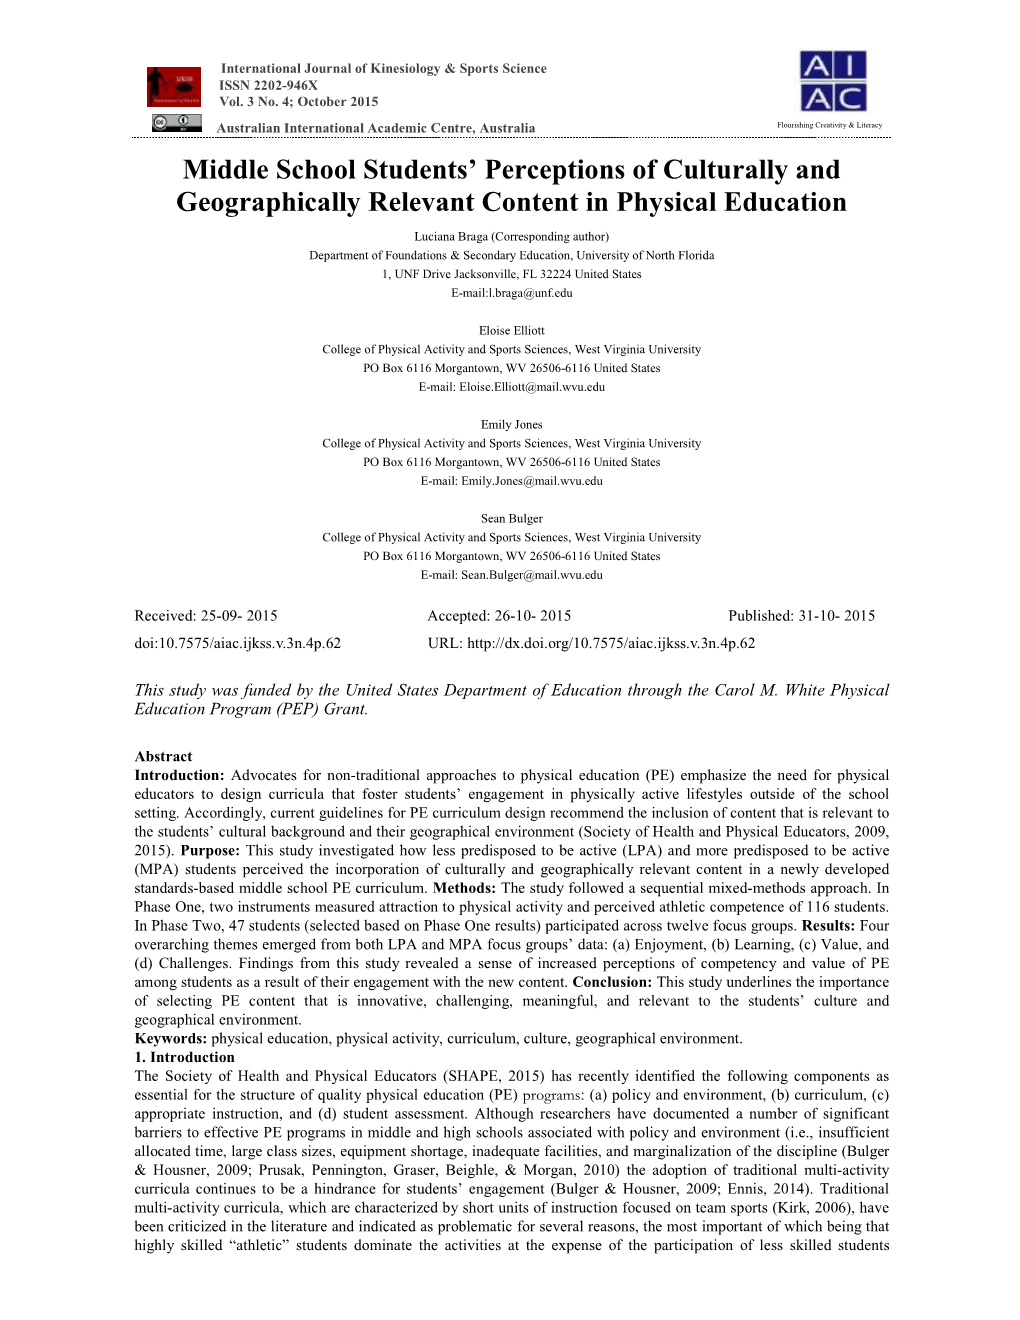 Middle School Students' Perceptions of Culturally and Geographically Relevant Content in Physical Education